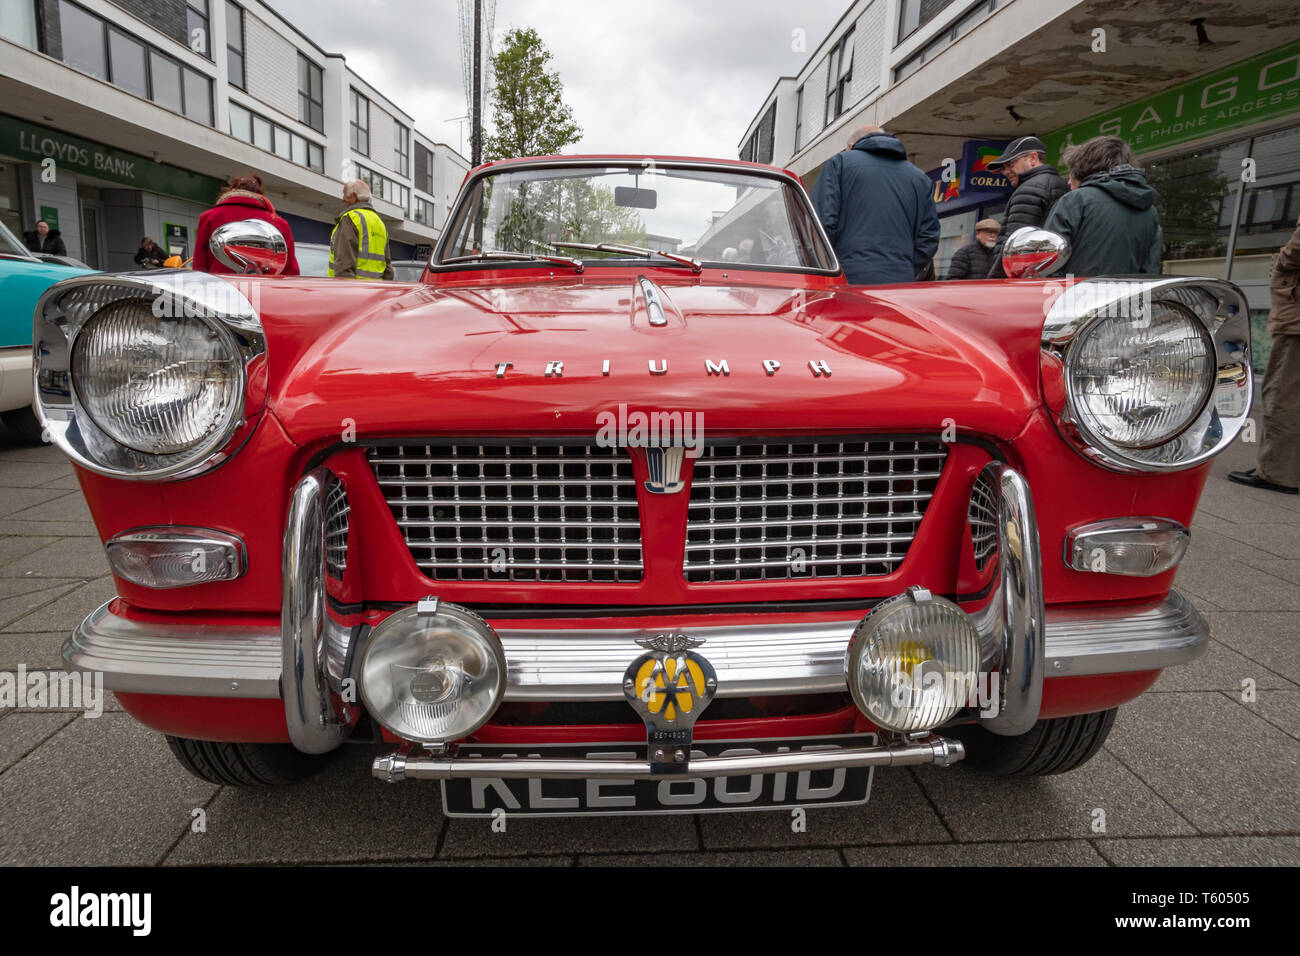 Red 1966 Triumph Herald 1200 vintage convertible car at a classic motor vehicle show in the UK Stock Photo